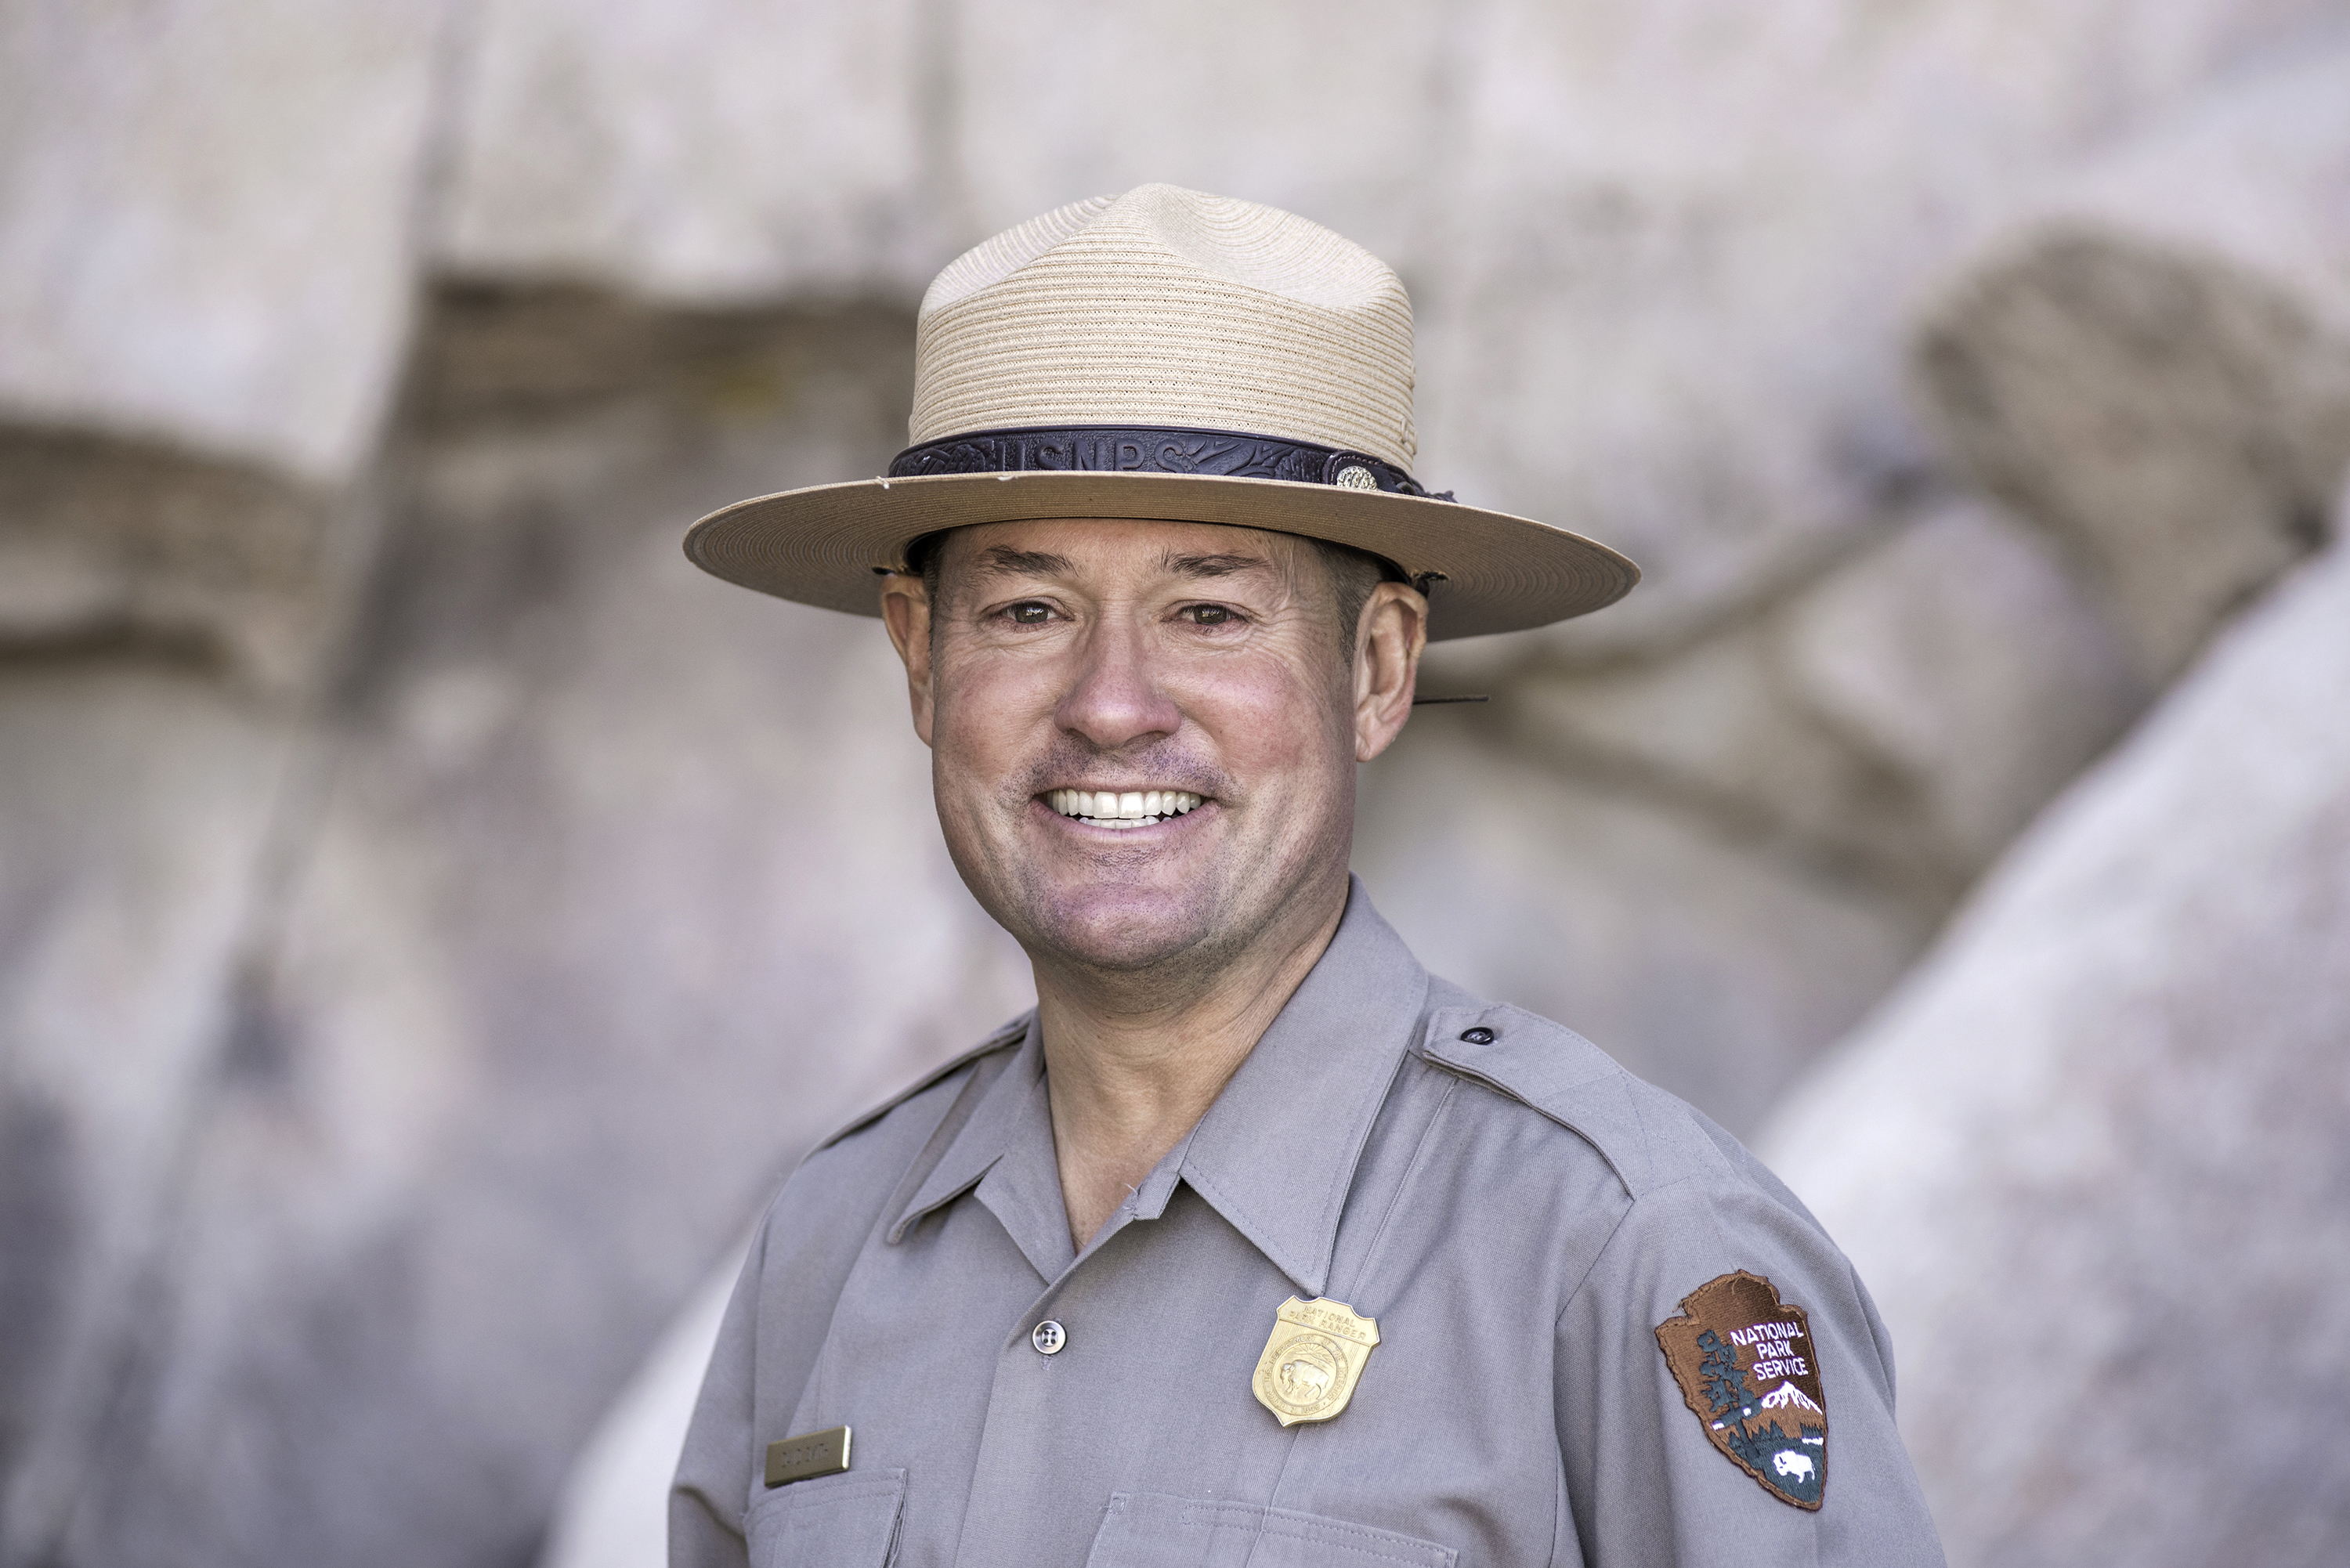 A white man smiles in a gray NPS uniform shirt and tan flat hat stands in front of a tan/gray rock wall. He is only visable from the chest up.